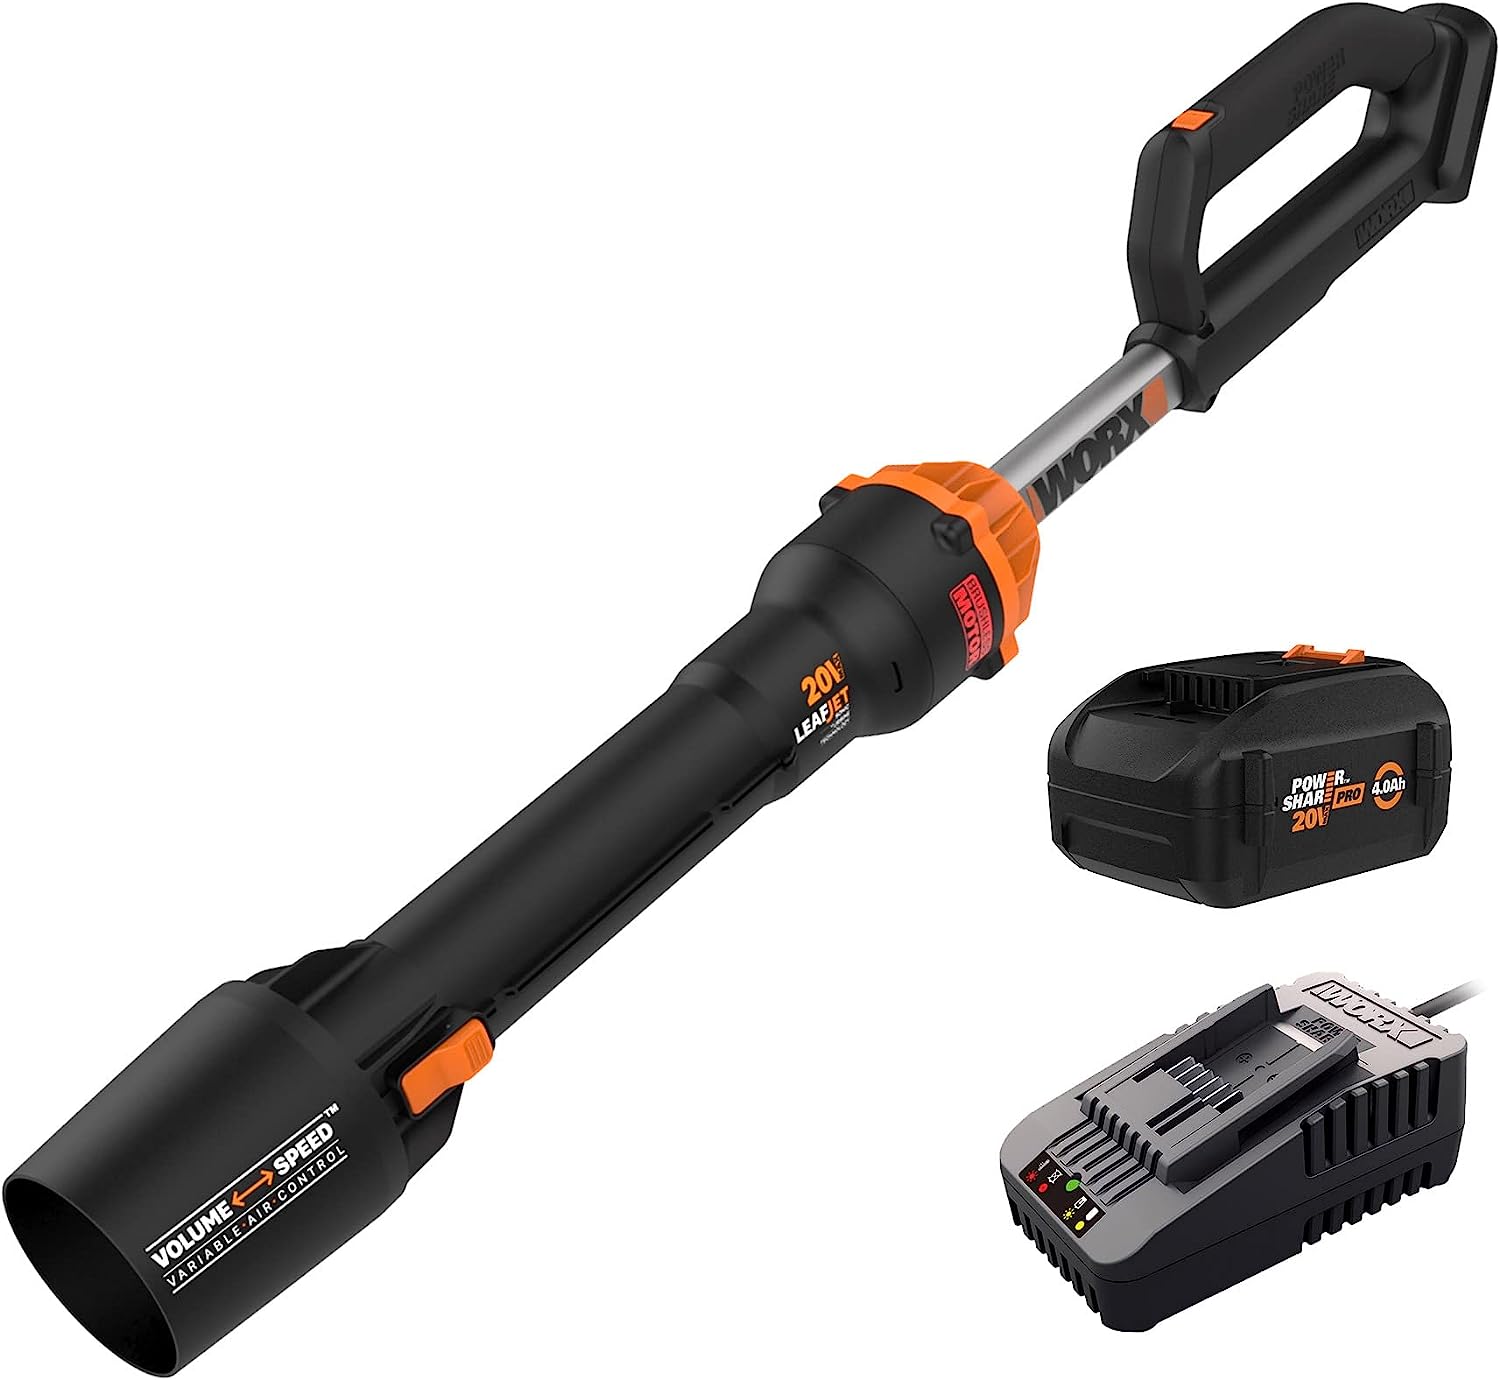 WORX 20V LEAFJET Cordless Leaf Blower with Power Share [...]